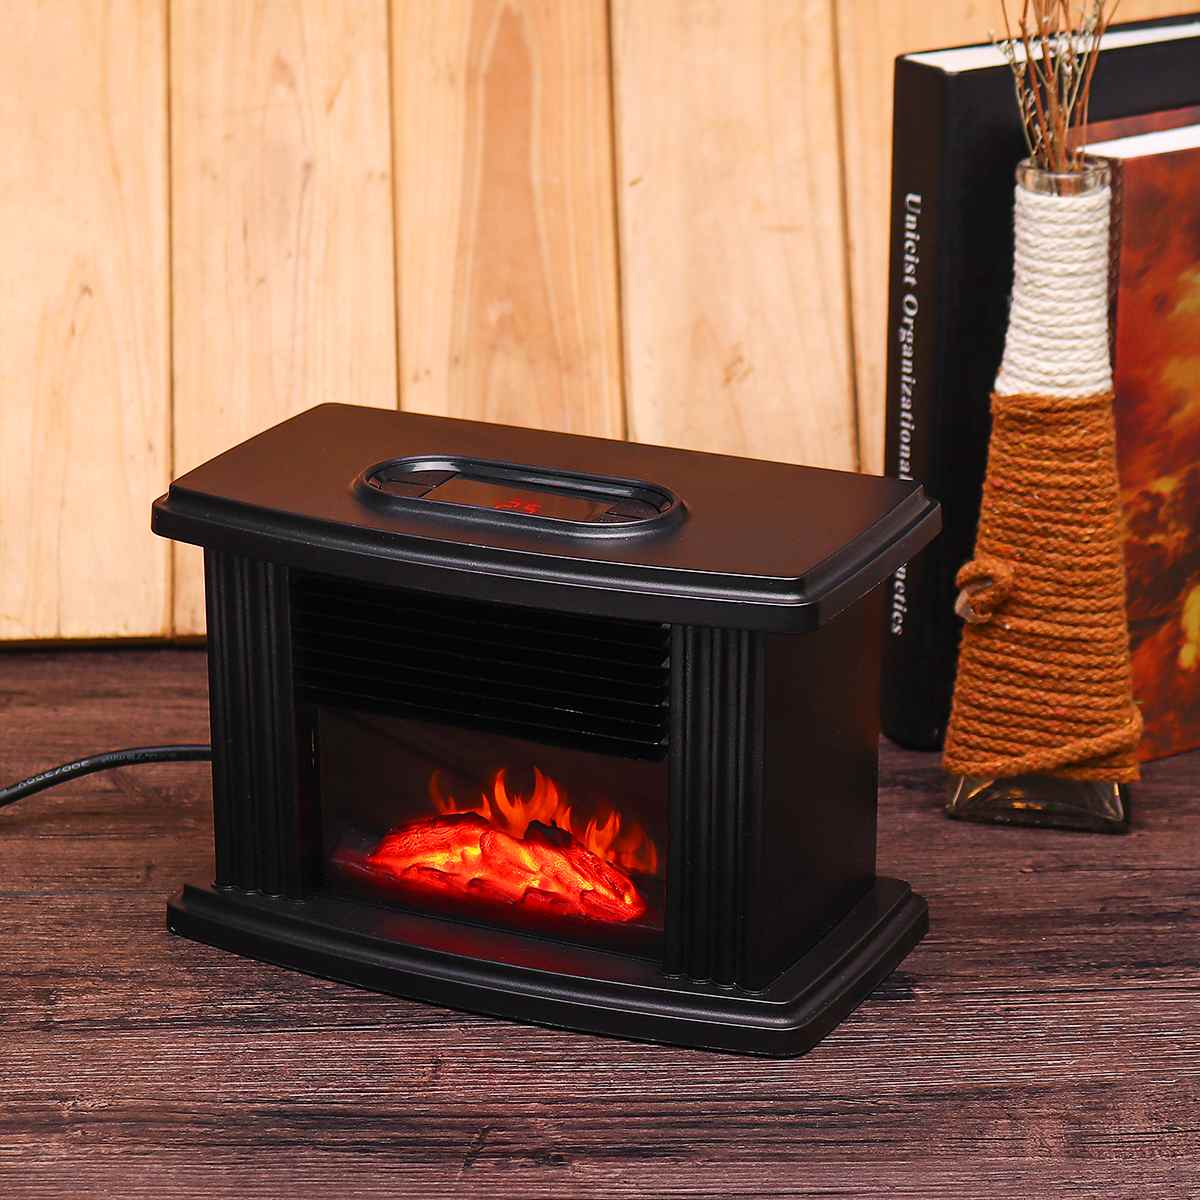 1000W Desktop Mini Electric Fireplace Heater with Log Flame Effect Warm Air Heater Fan Desk Table Heating For Winter Smart Home